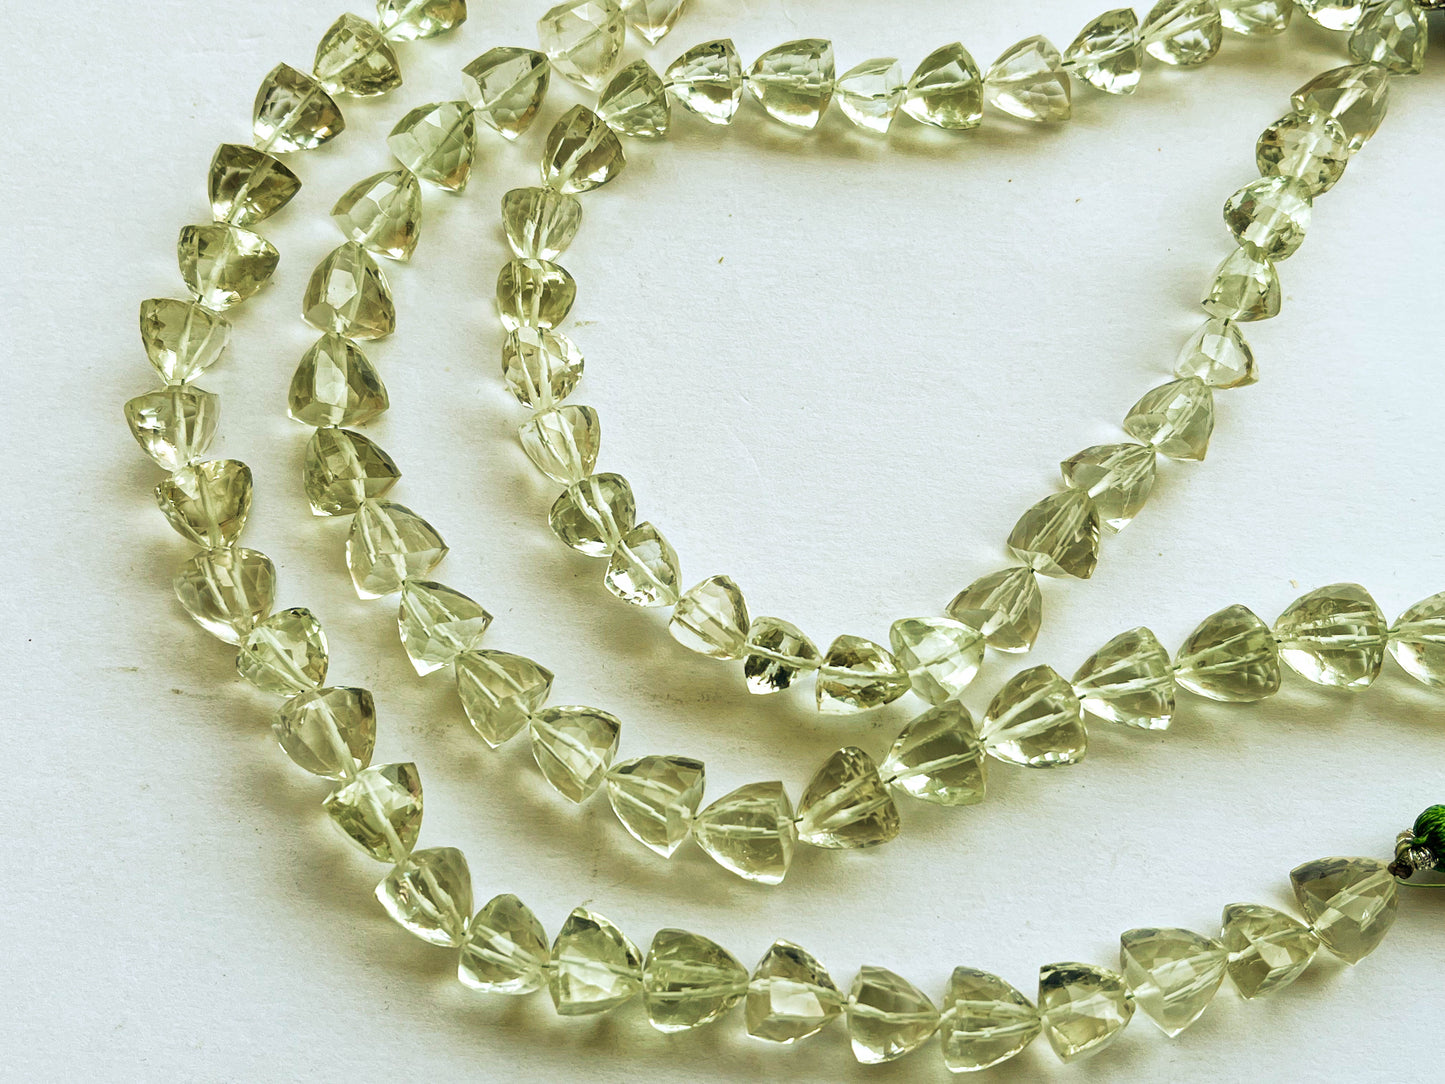 Green Amethyst 3D Pyramid / Trillion Shape Briolette Beads Beadsforyourjewelry